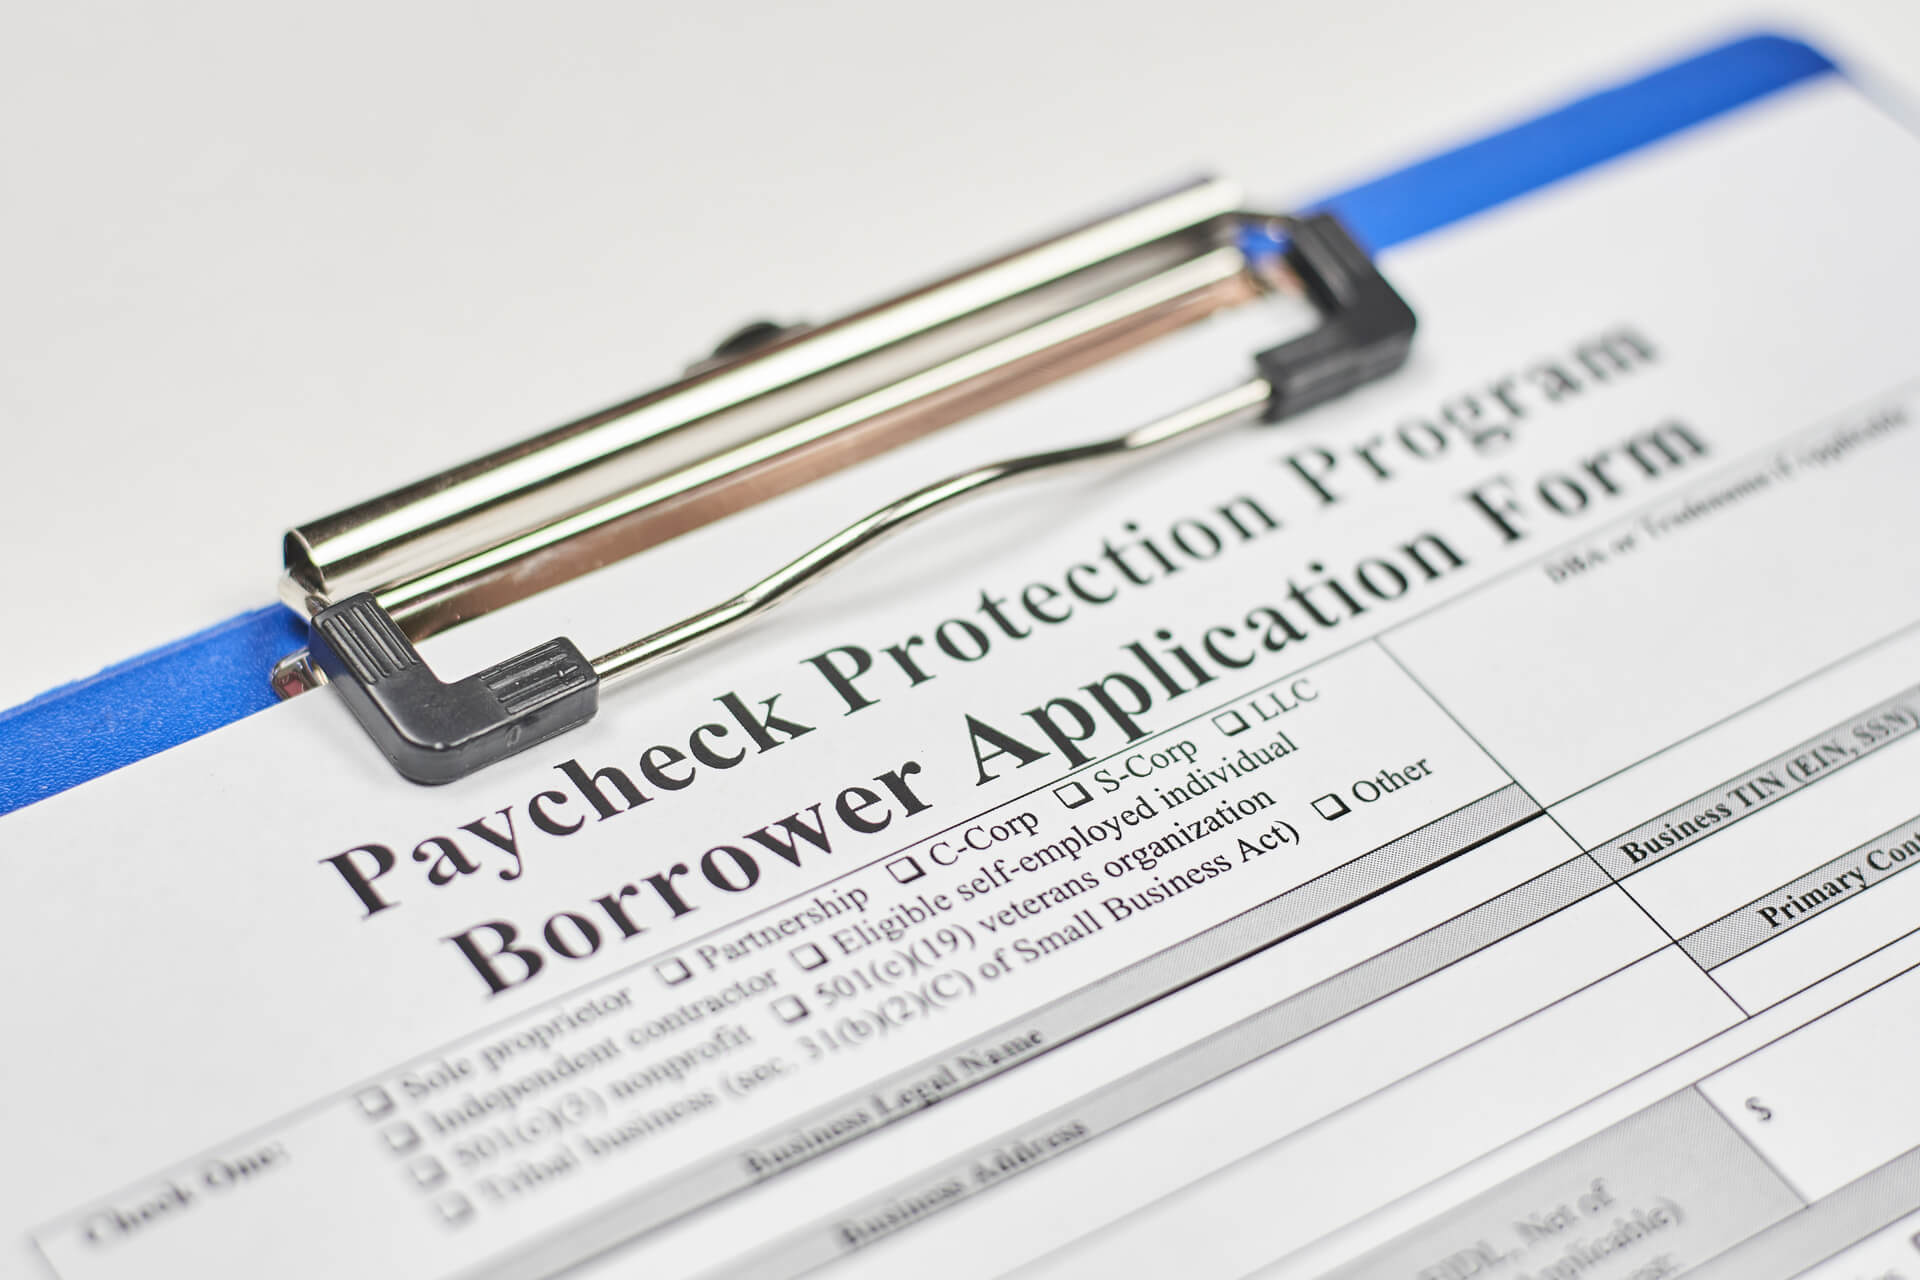 Paycheck Protection Program Application Form